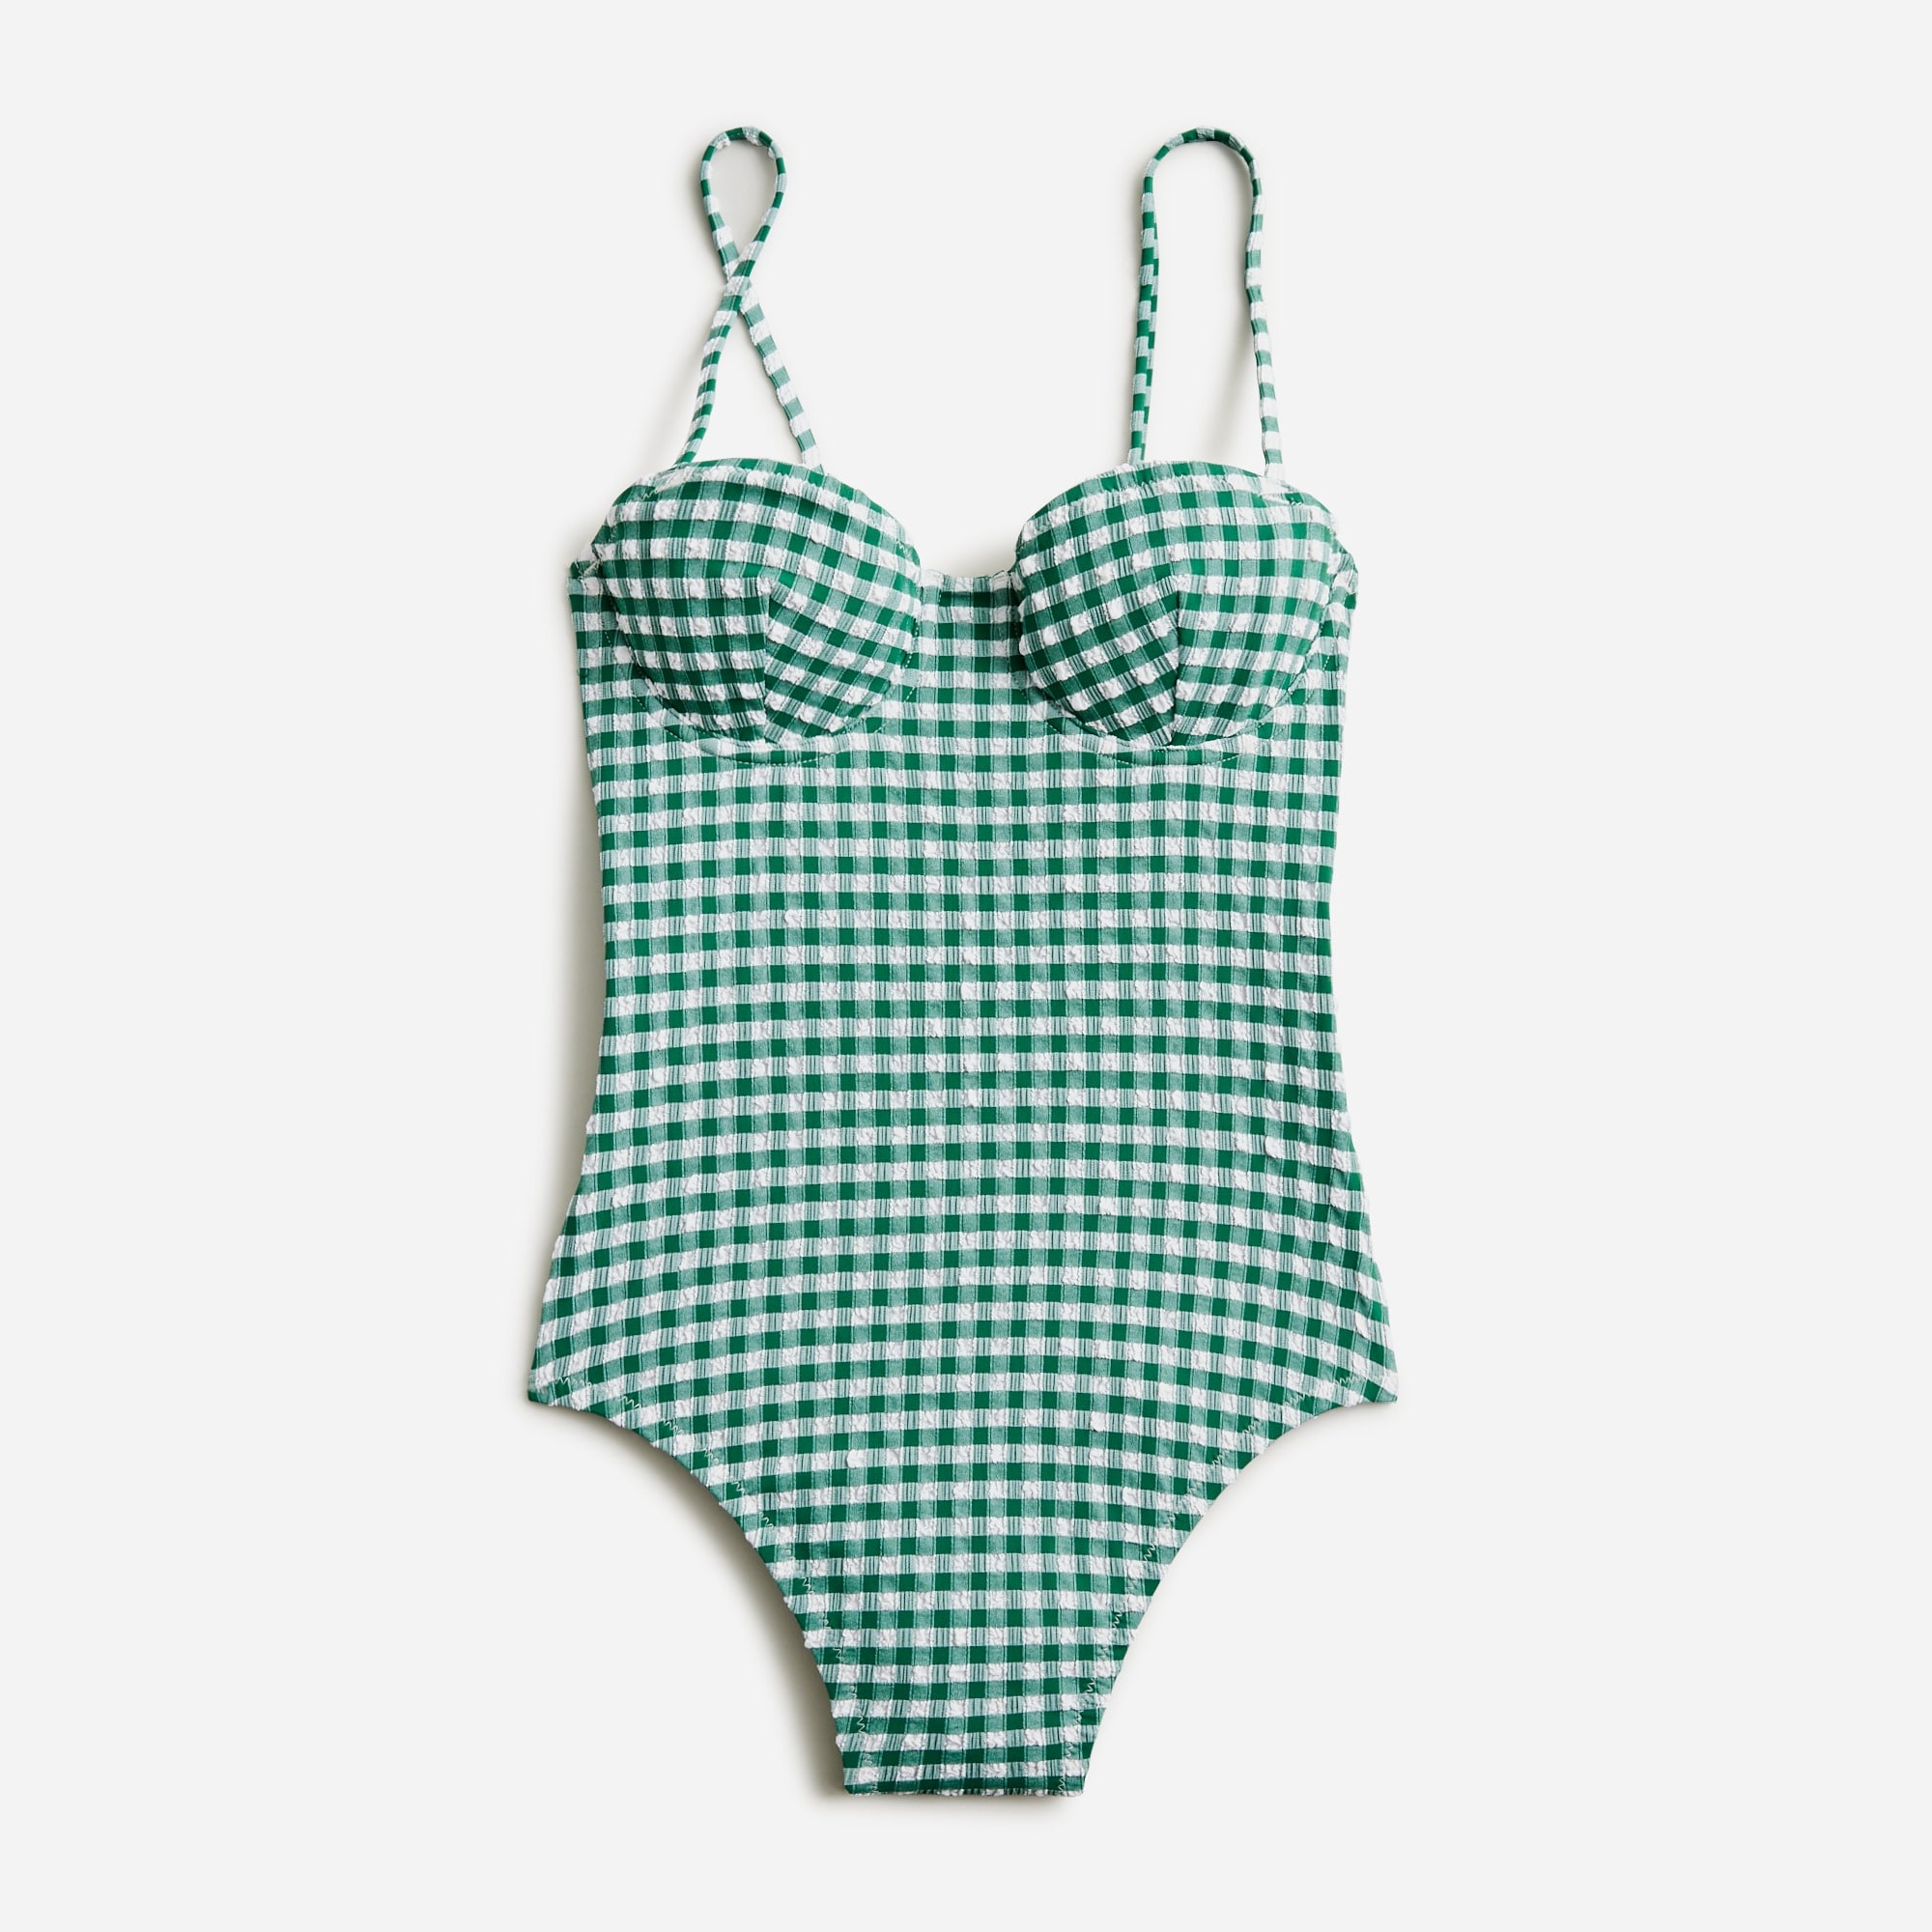  Balconette underwire one-piece swimsuit in gingham